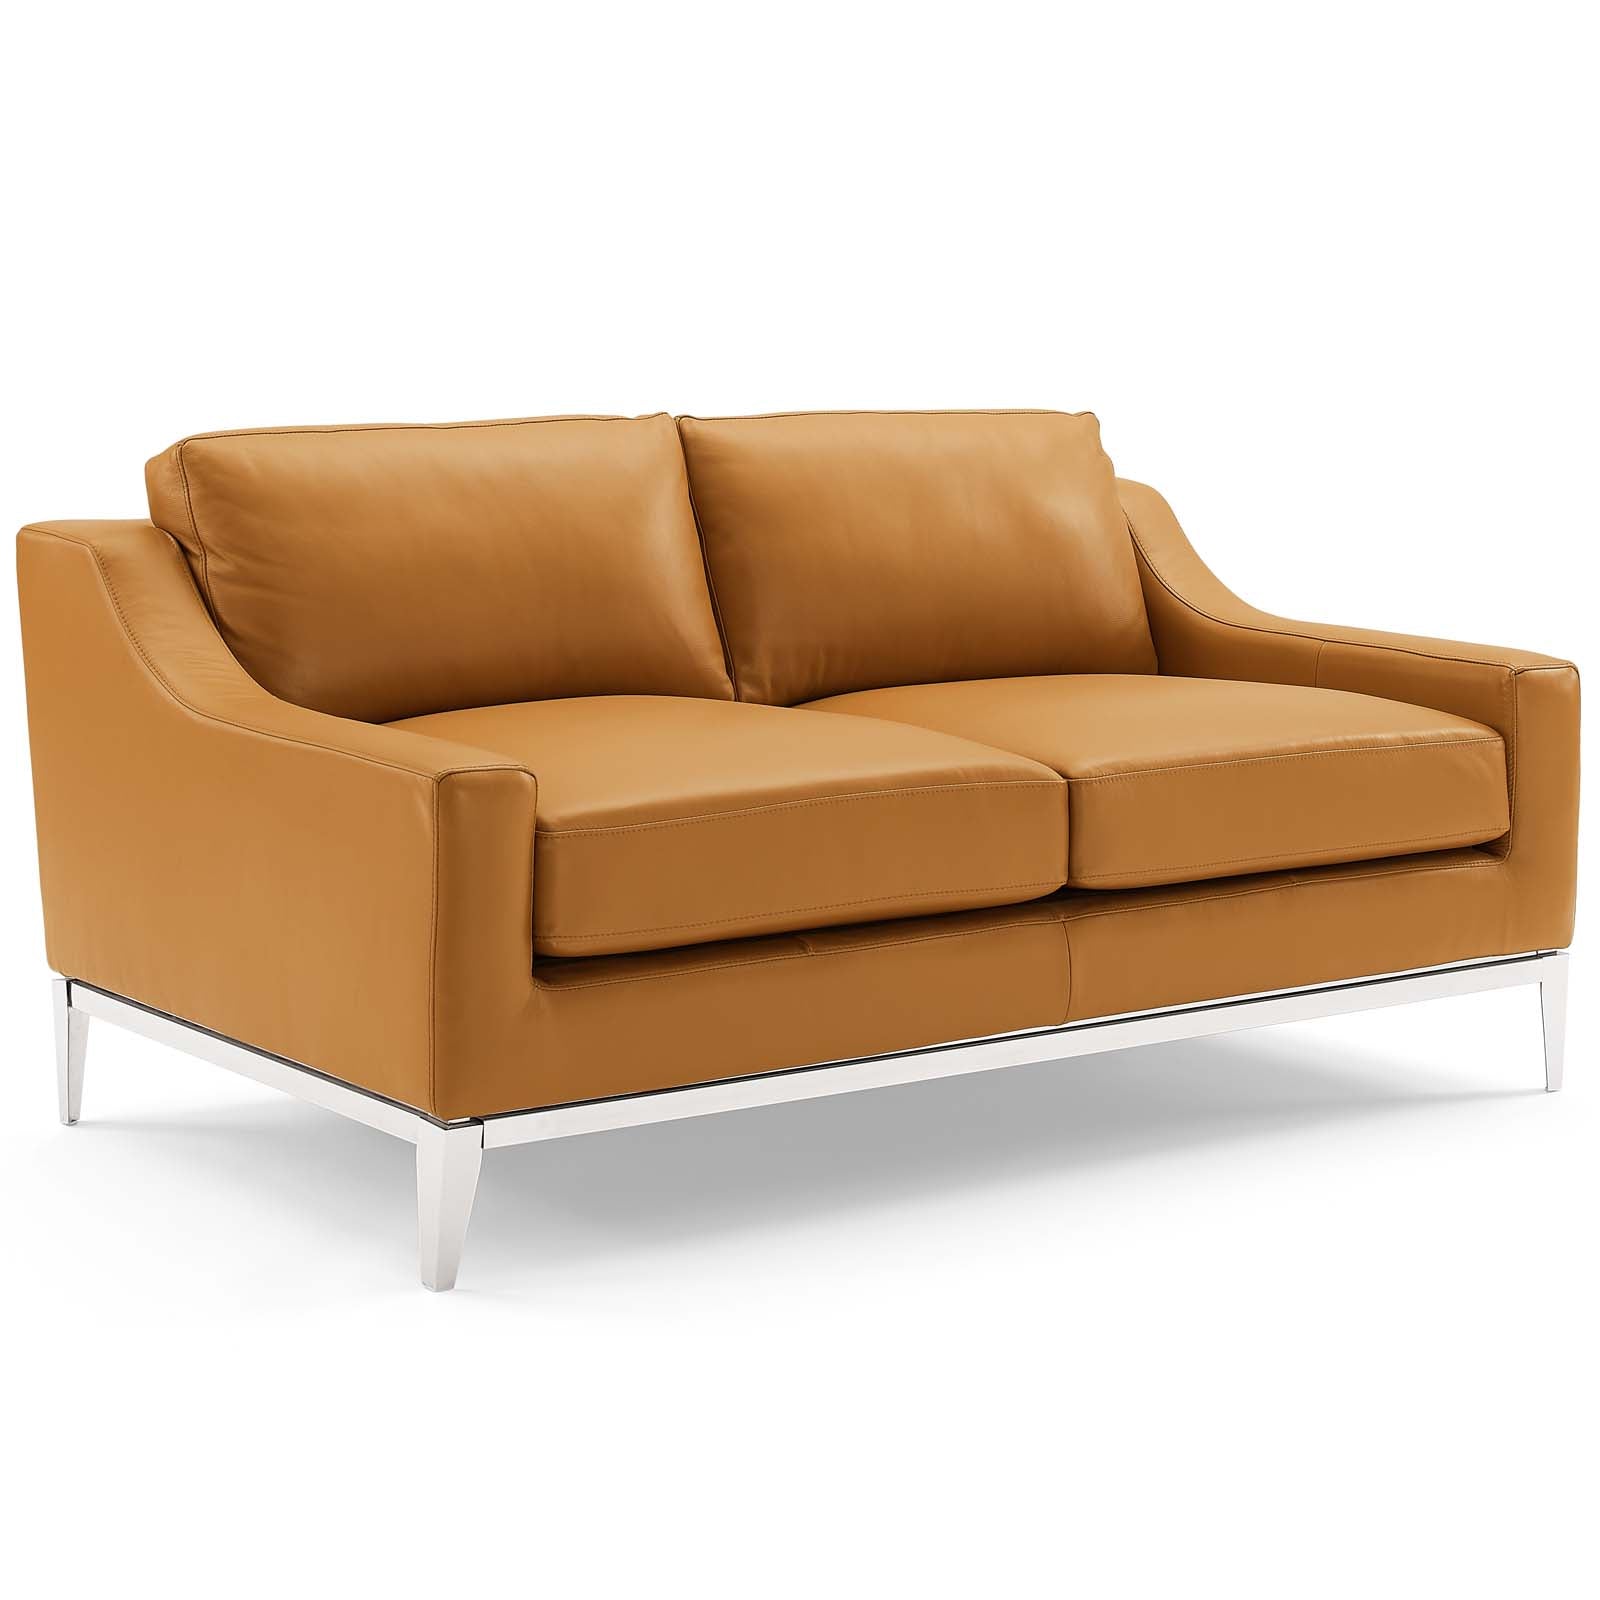 Modway Sofas & Couches - Harness-Stainless-Steel-Base-Leather-Sofa-and-Loveseat-Set-Tan